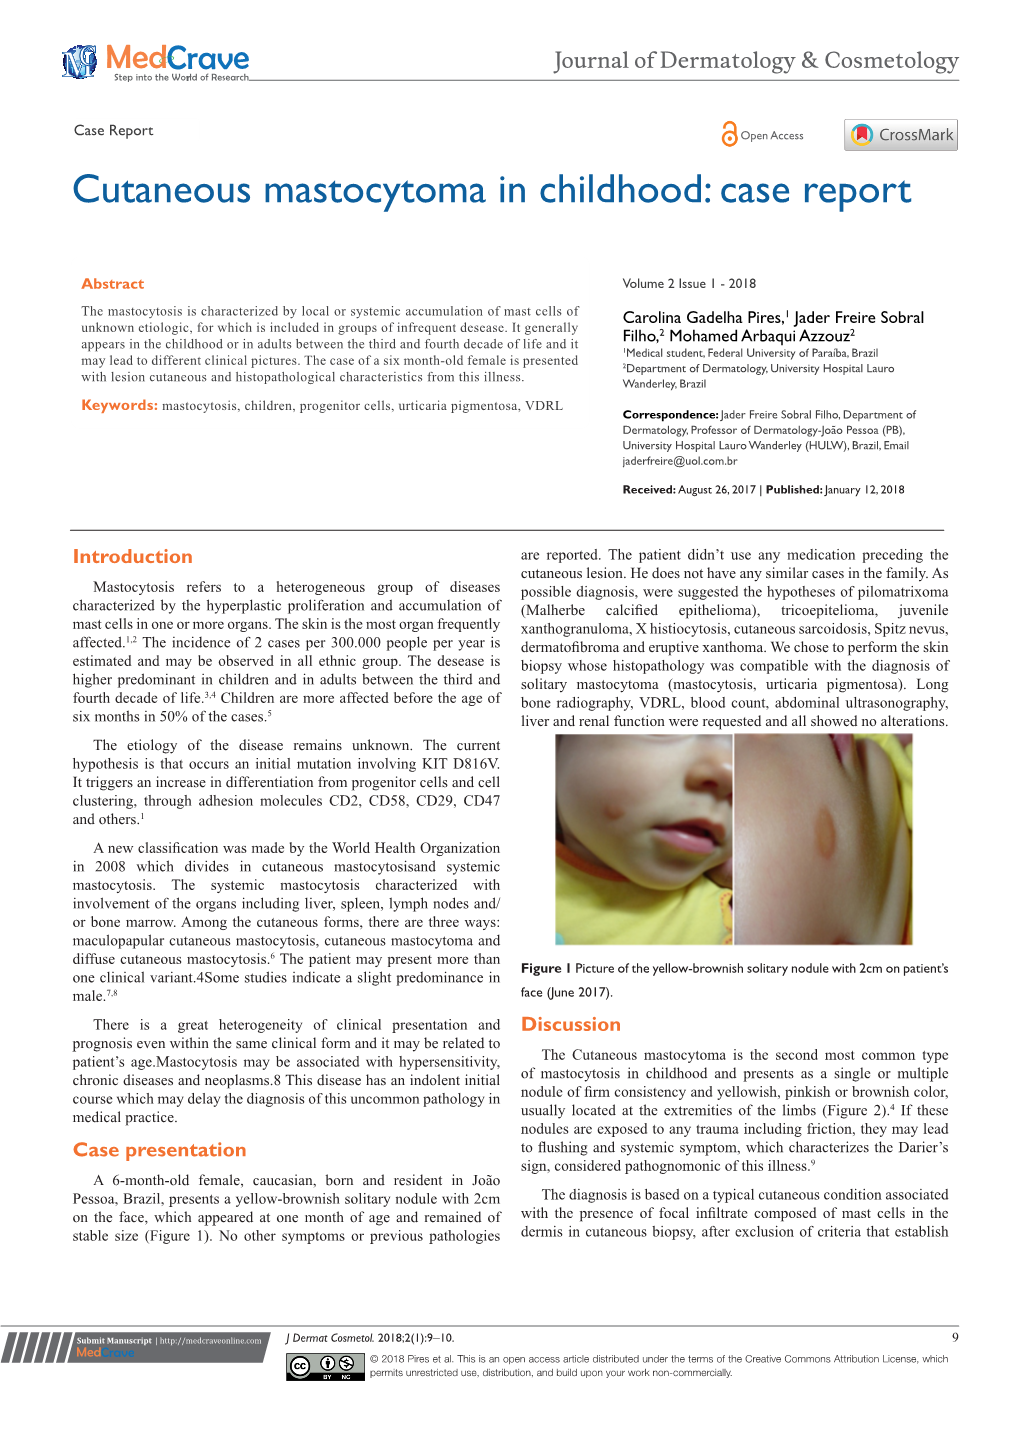 Cutaneous Mastocytoma in Childhood: Case Report